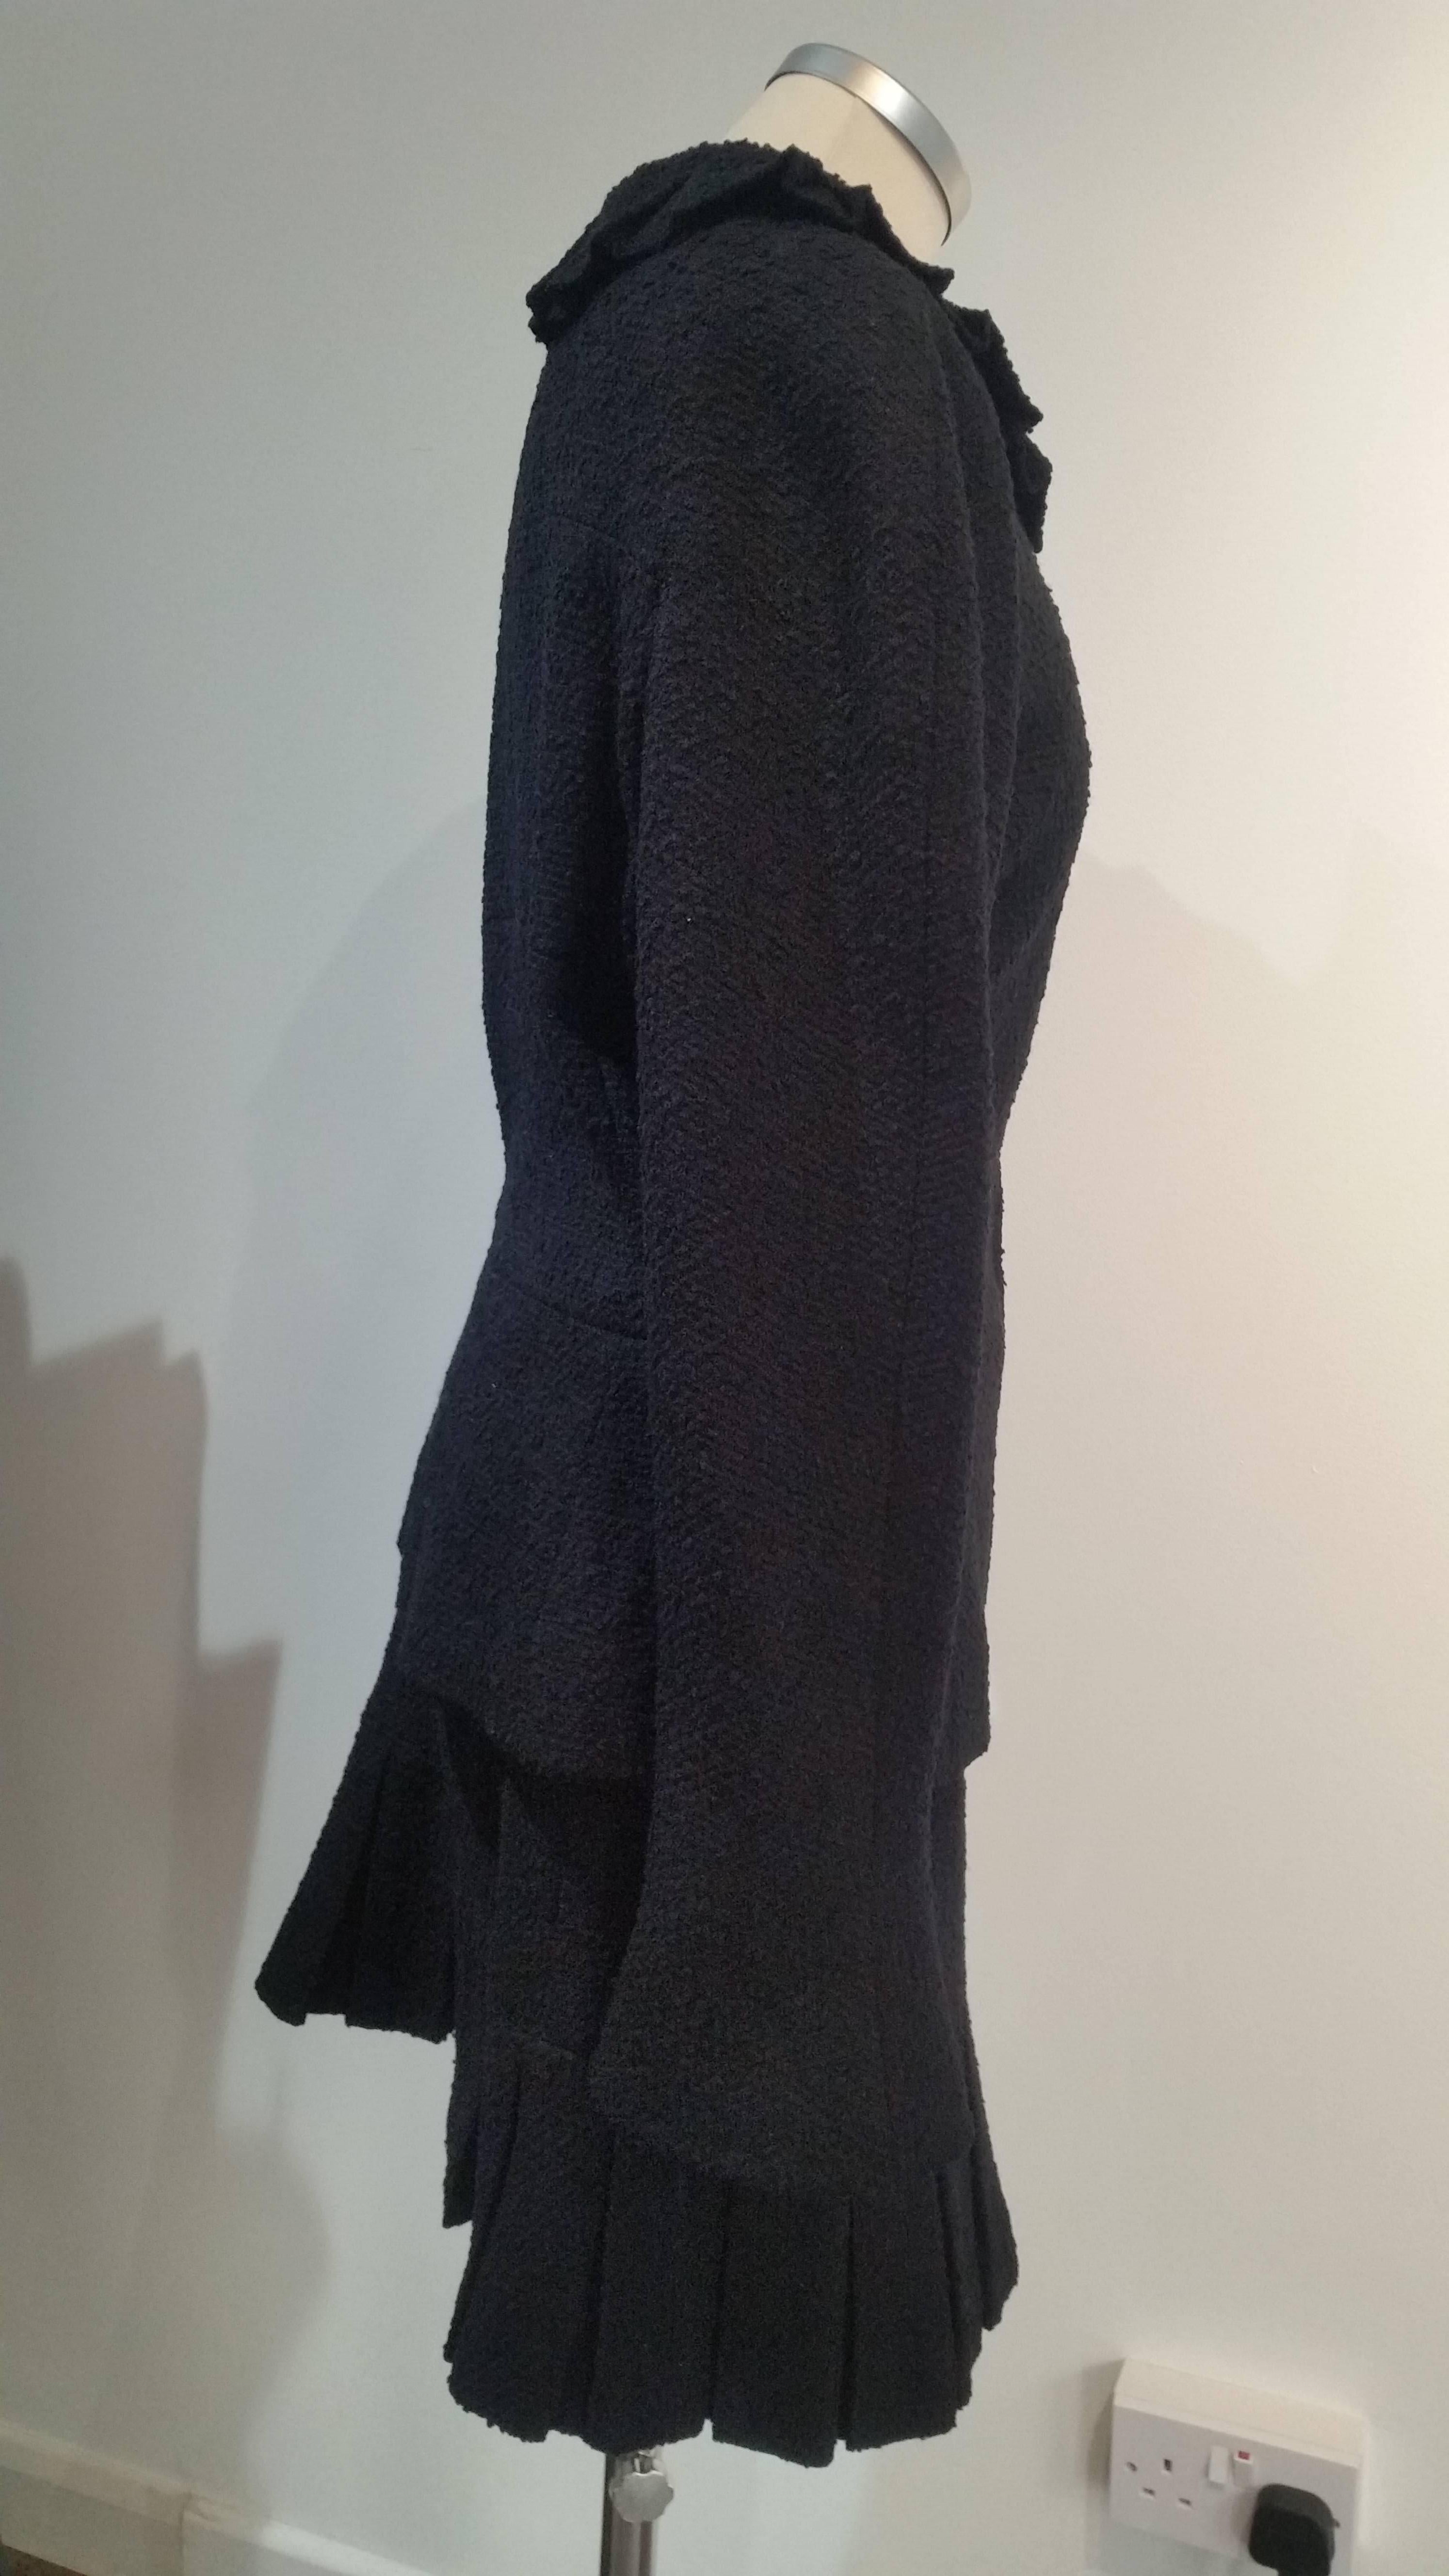 Vintage Chanel Black Boucle Skirt Suit. Nipped in waist
Season: 97 A
Silk lining with Double C.
Chain stitched into hem.
Chanel button on one of the sleeves
Completely lined.
Zip up front.
Ruffle neckline with Chanel  zipper fastening.

Skirt has